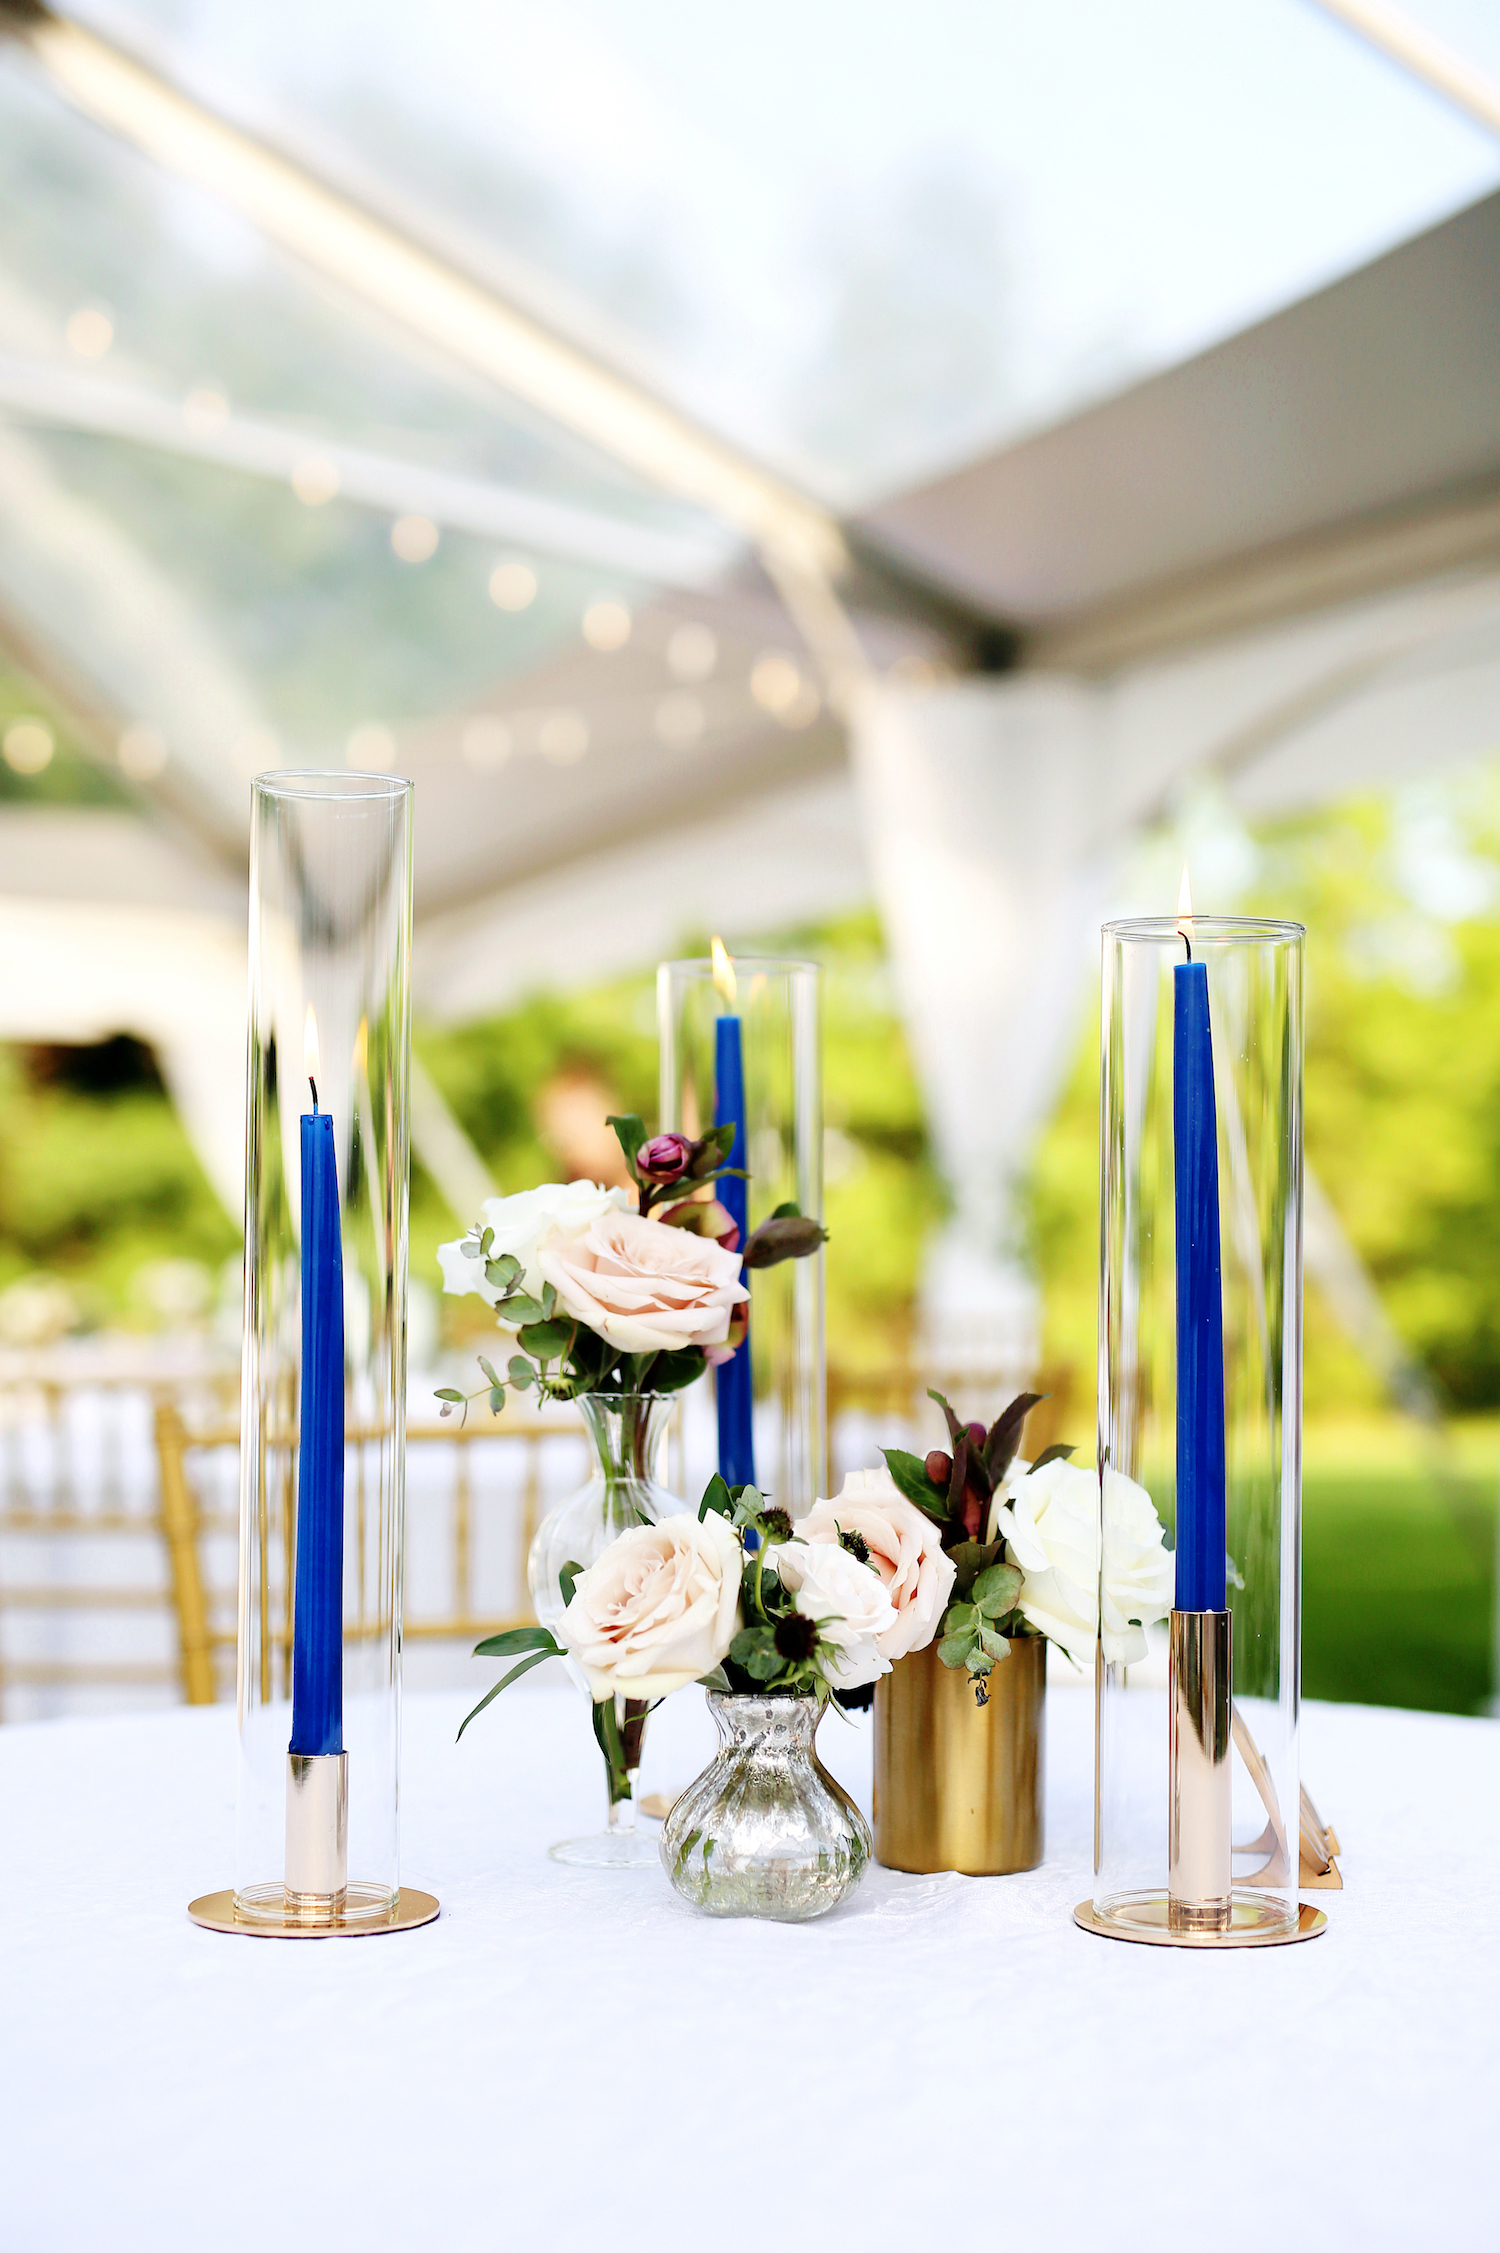 Table setup with candles and flowers